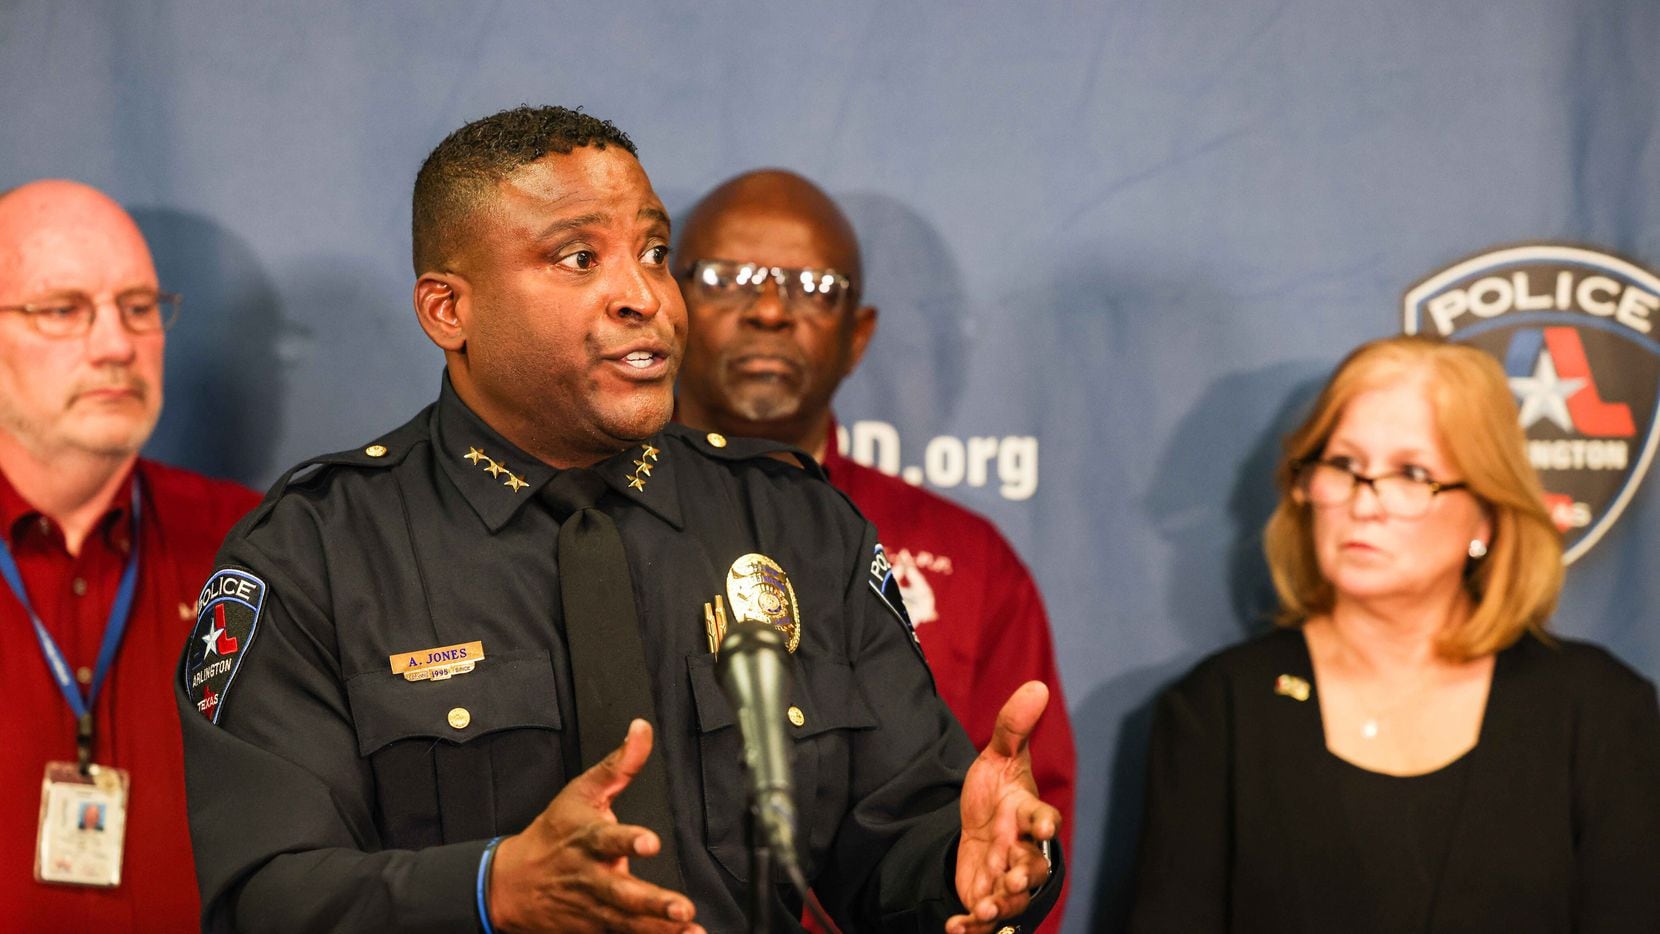 Arlington Chief of Police Al Jones is pictured during a press conference on Friday, October...